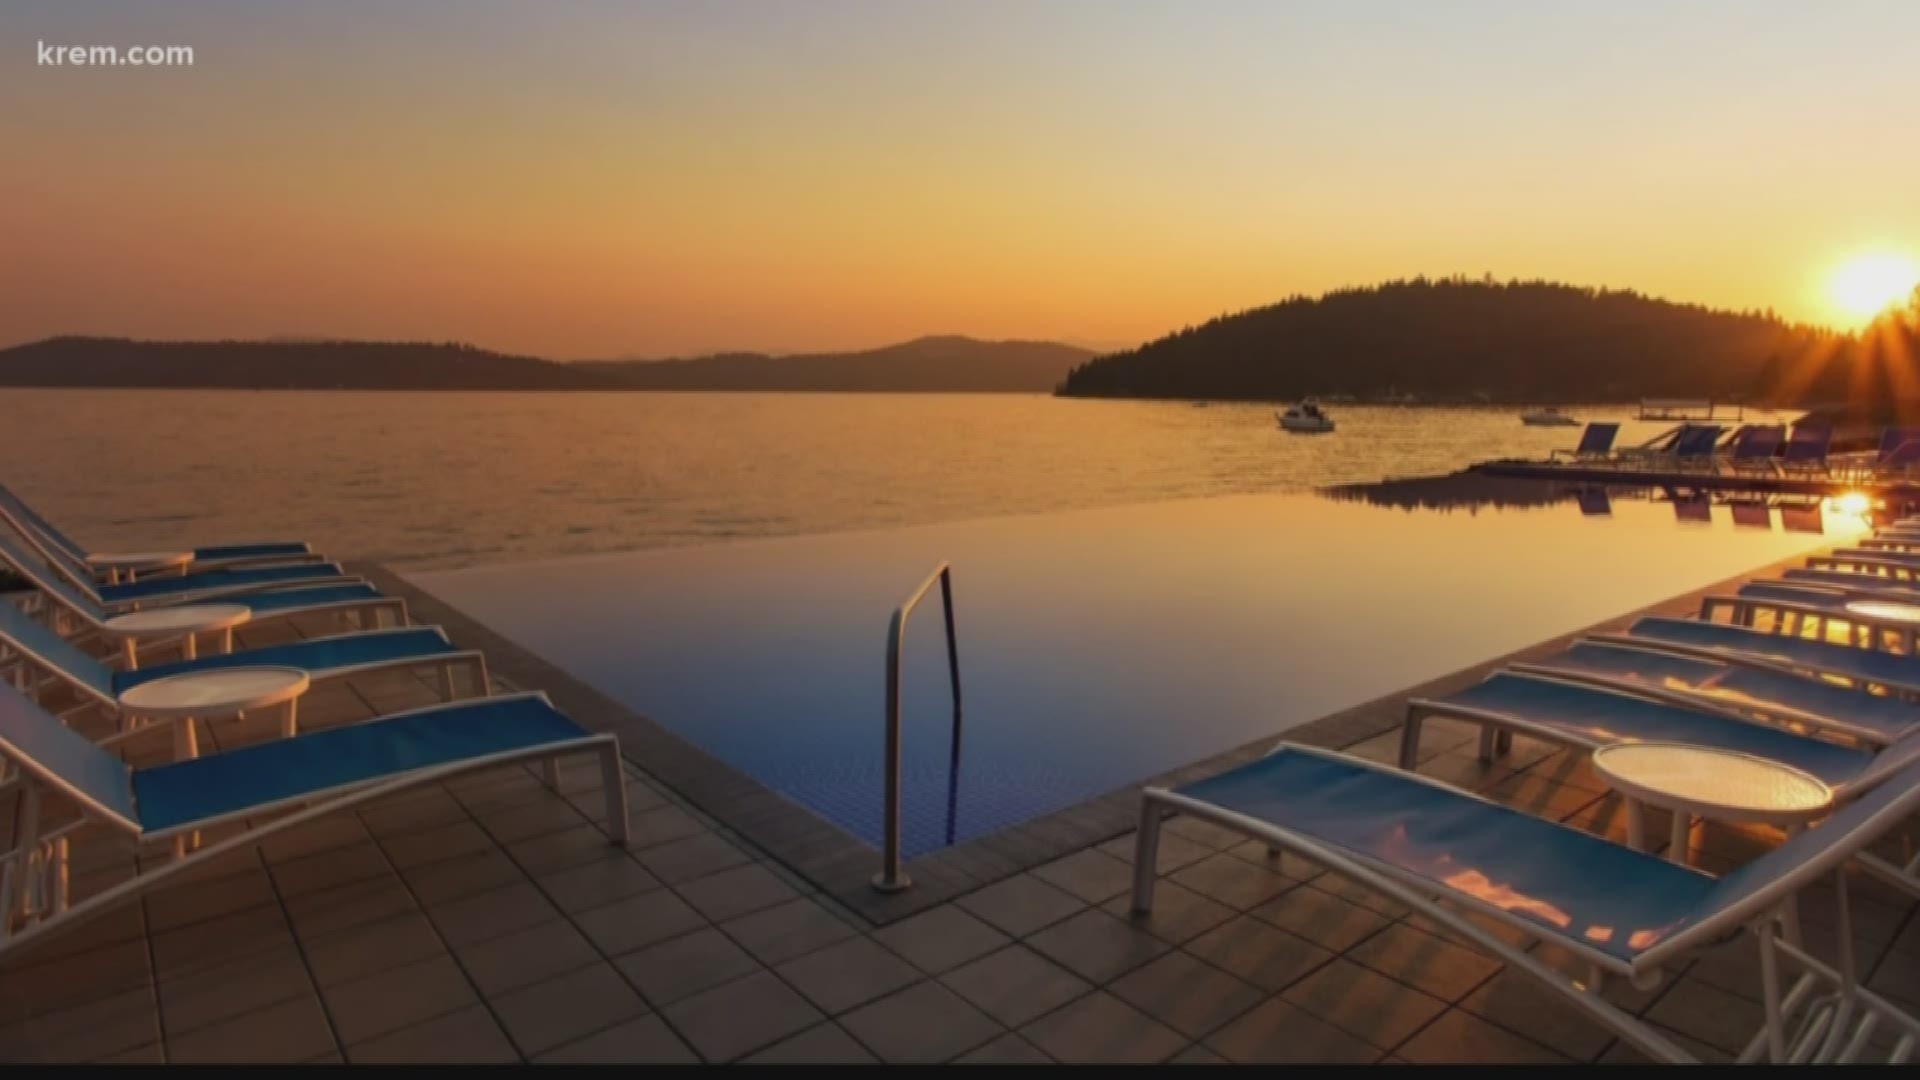 The Coeur d'Alene Resort is turning its giant infinity pool into a hot tub in January for those chilly Inland Northwest winter nights.